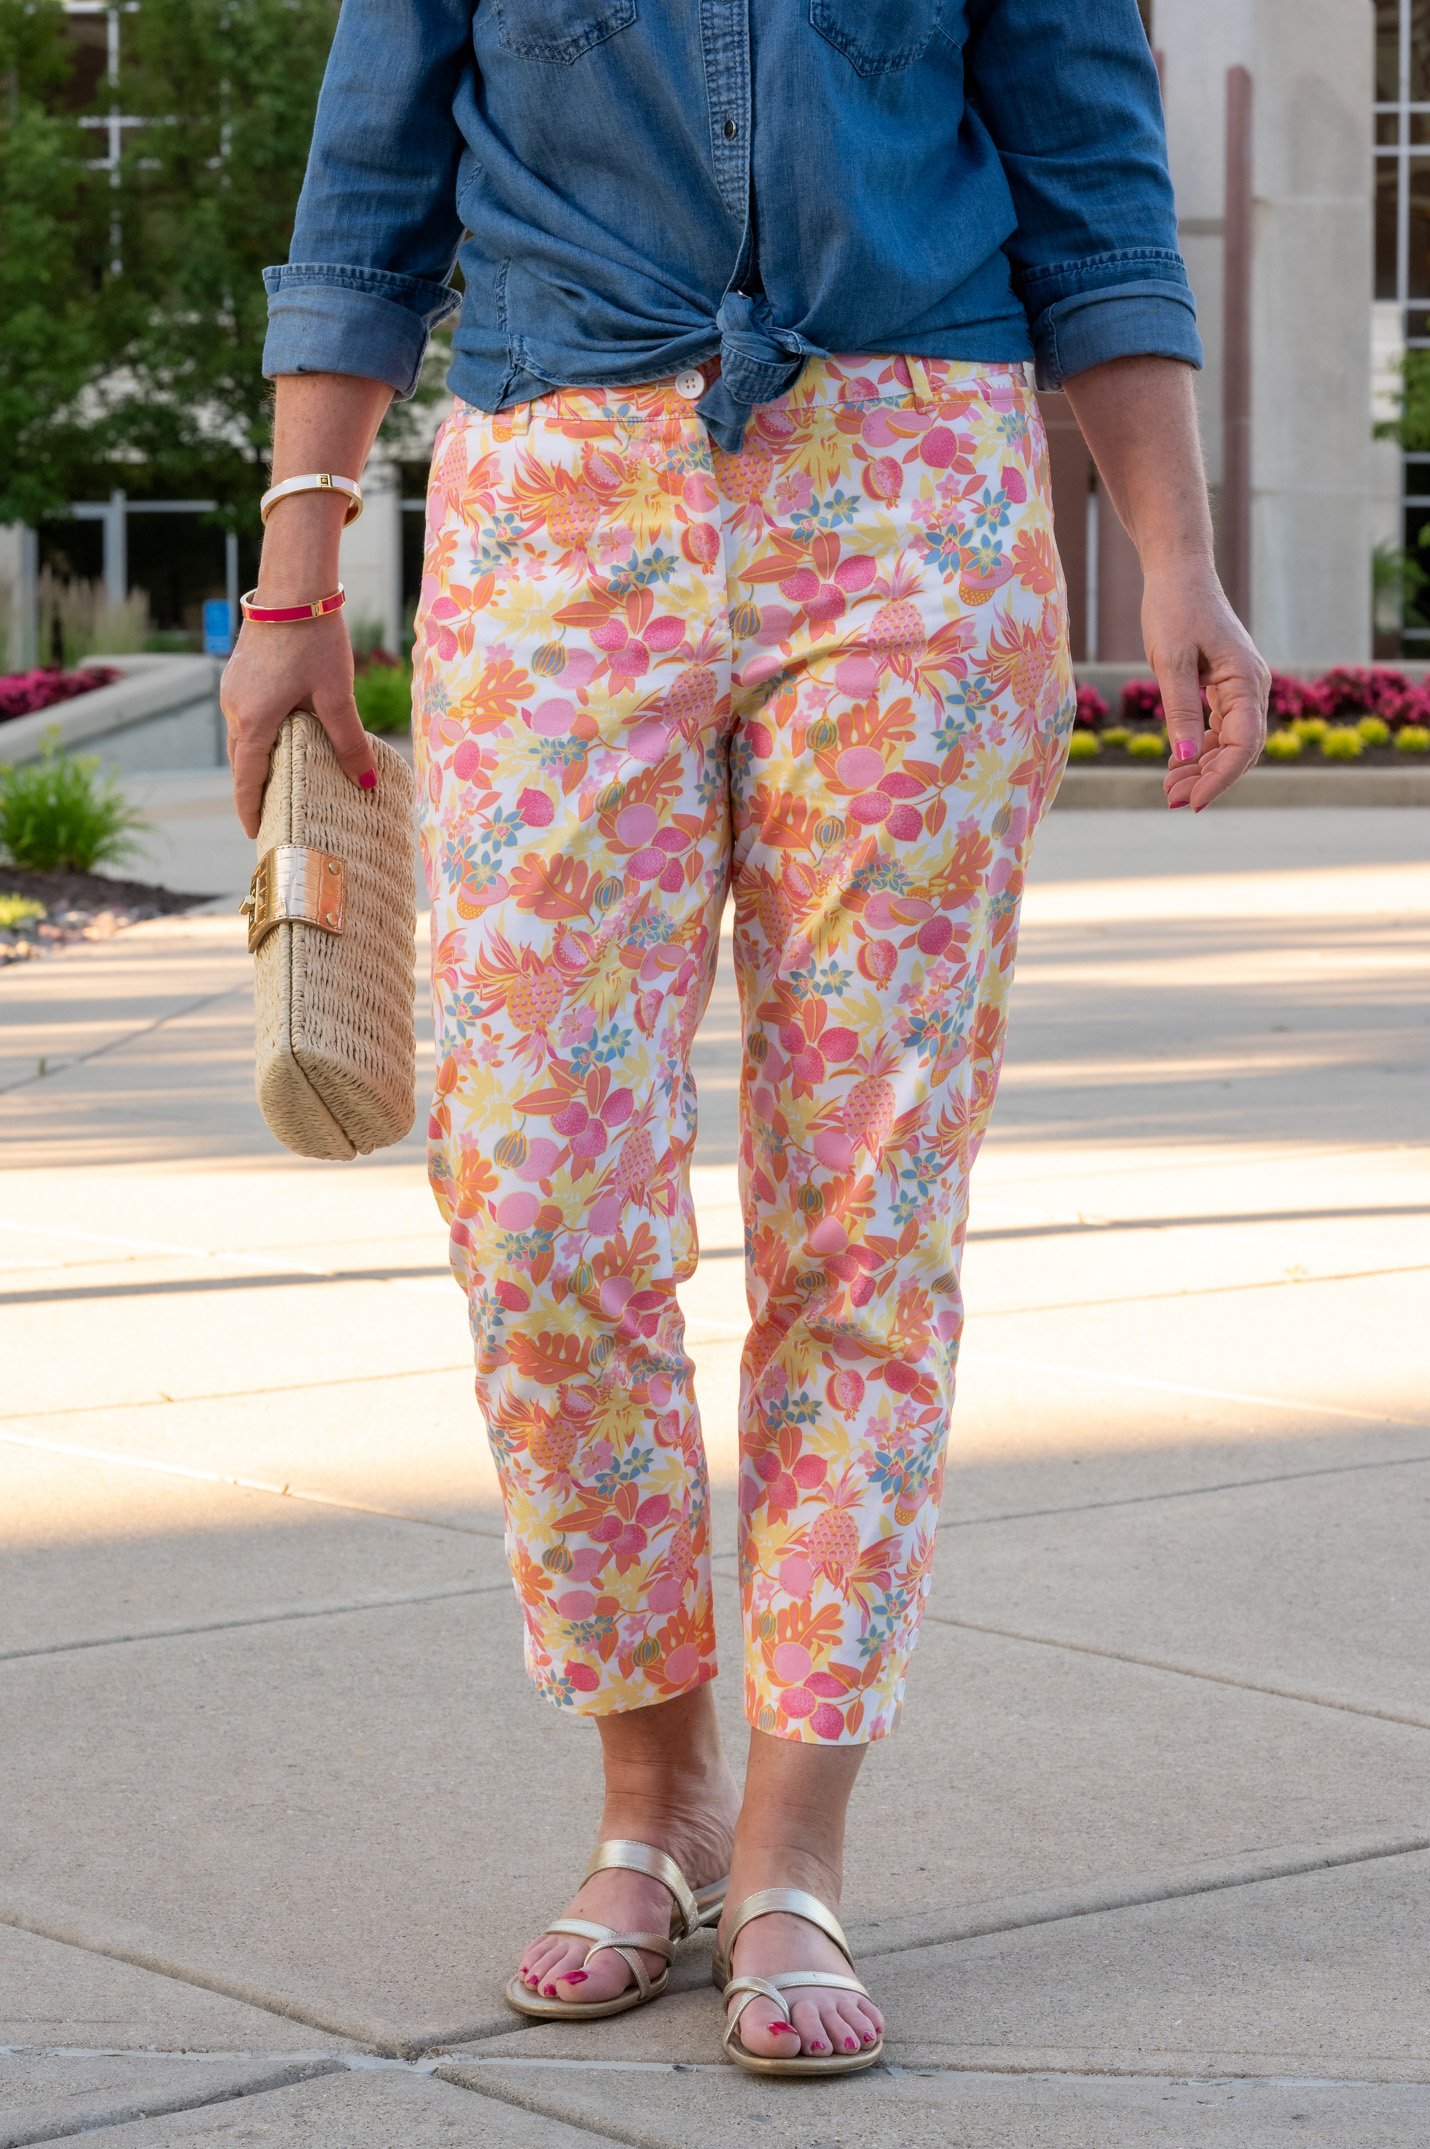 How to Style Floral Pantsso you look chic, not childish